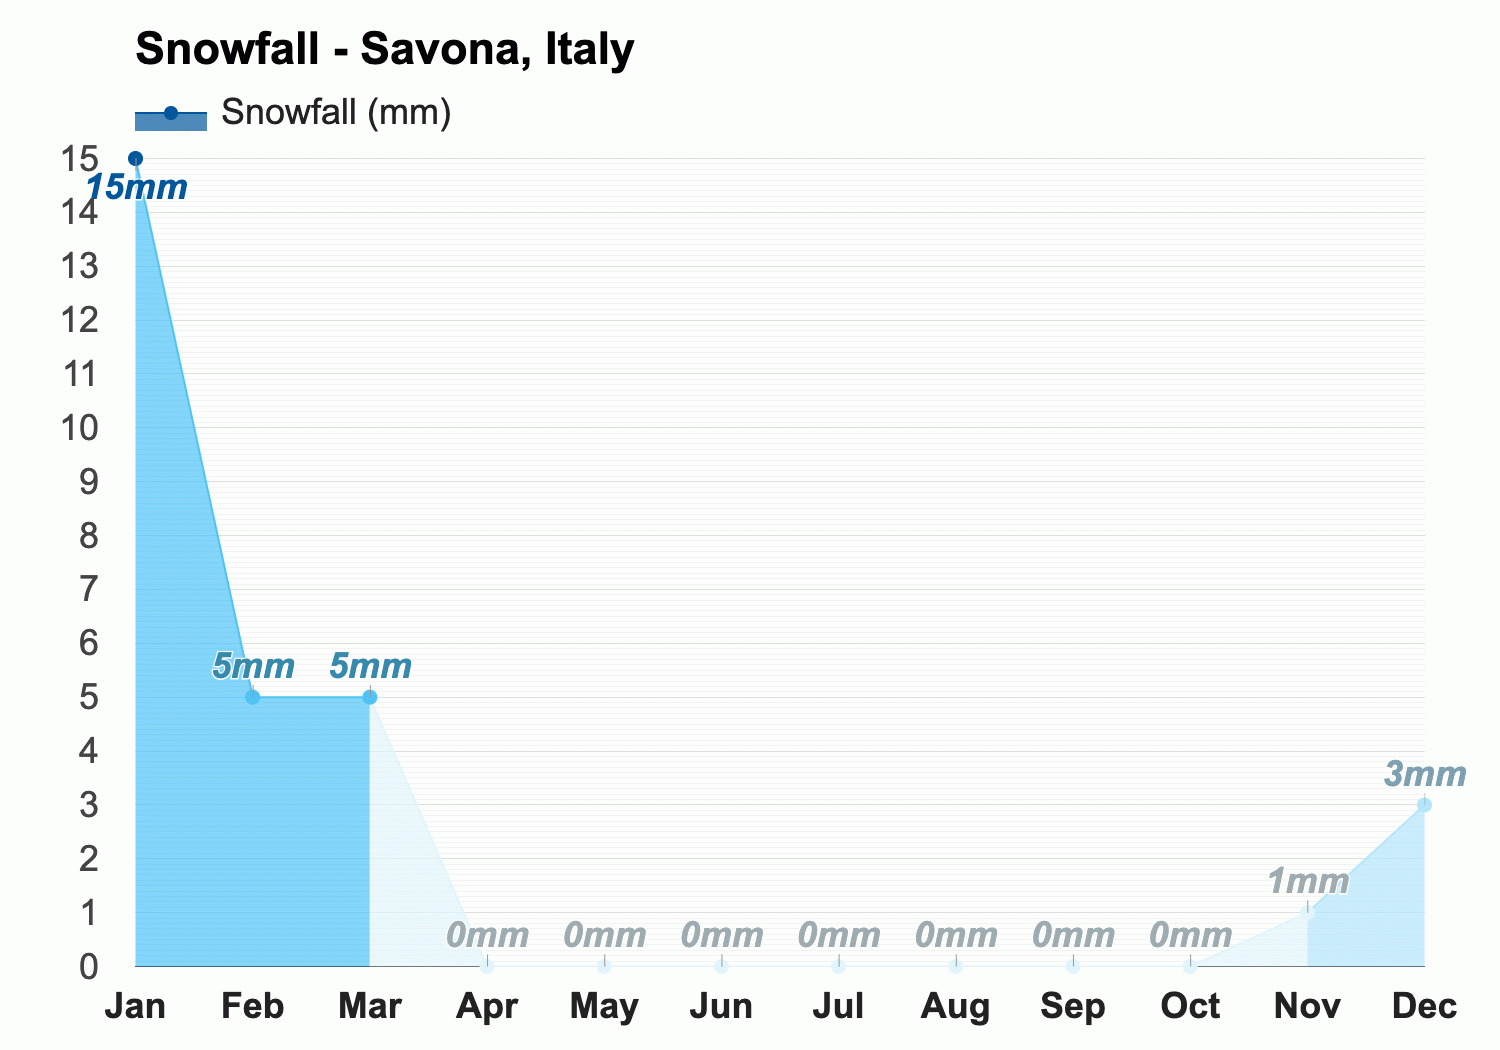 Savona, Italy - Climate & Monthly weather forecast